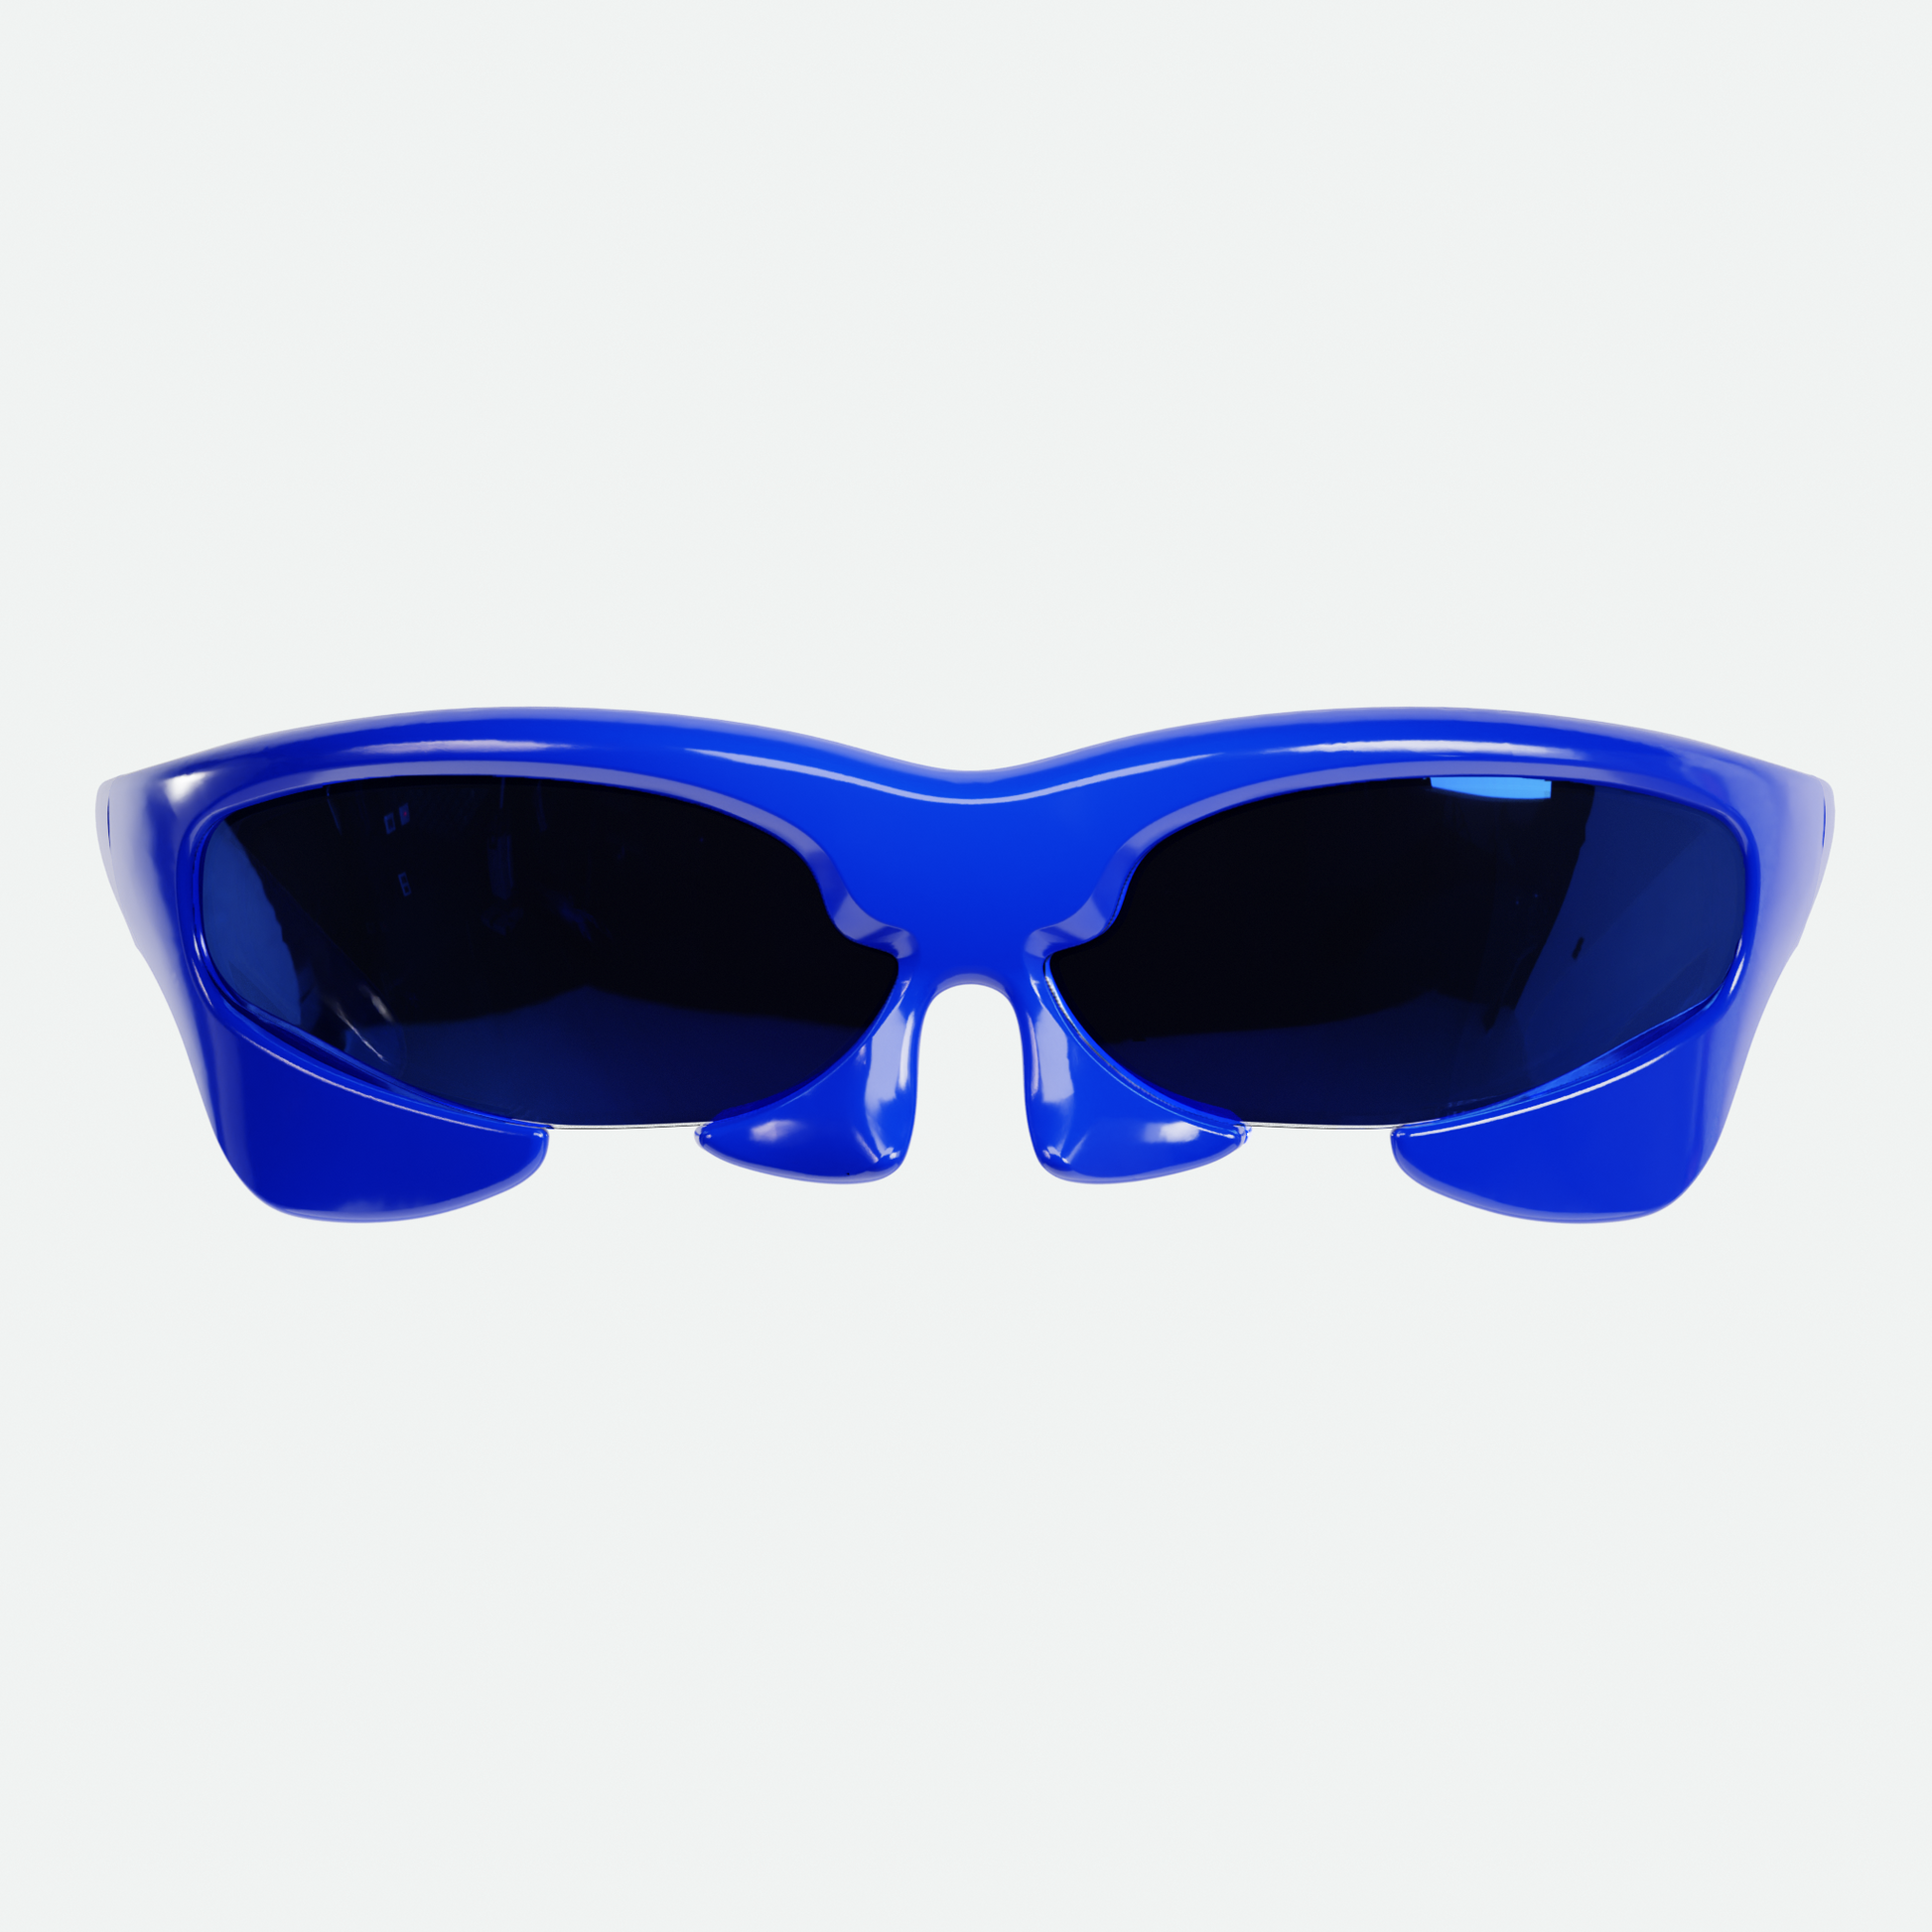 Front view render of Ruggeri Carapace sunglasses in vibrant blue, featuring a custom-moulded insectoid appearance with Category 3 UV400 REVO lenses, designed in Western Australia.